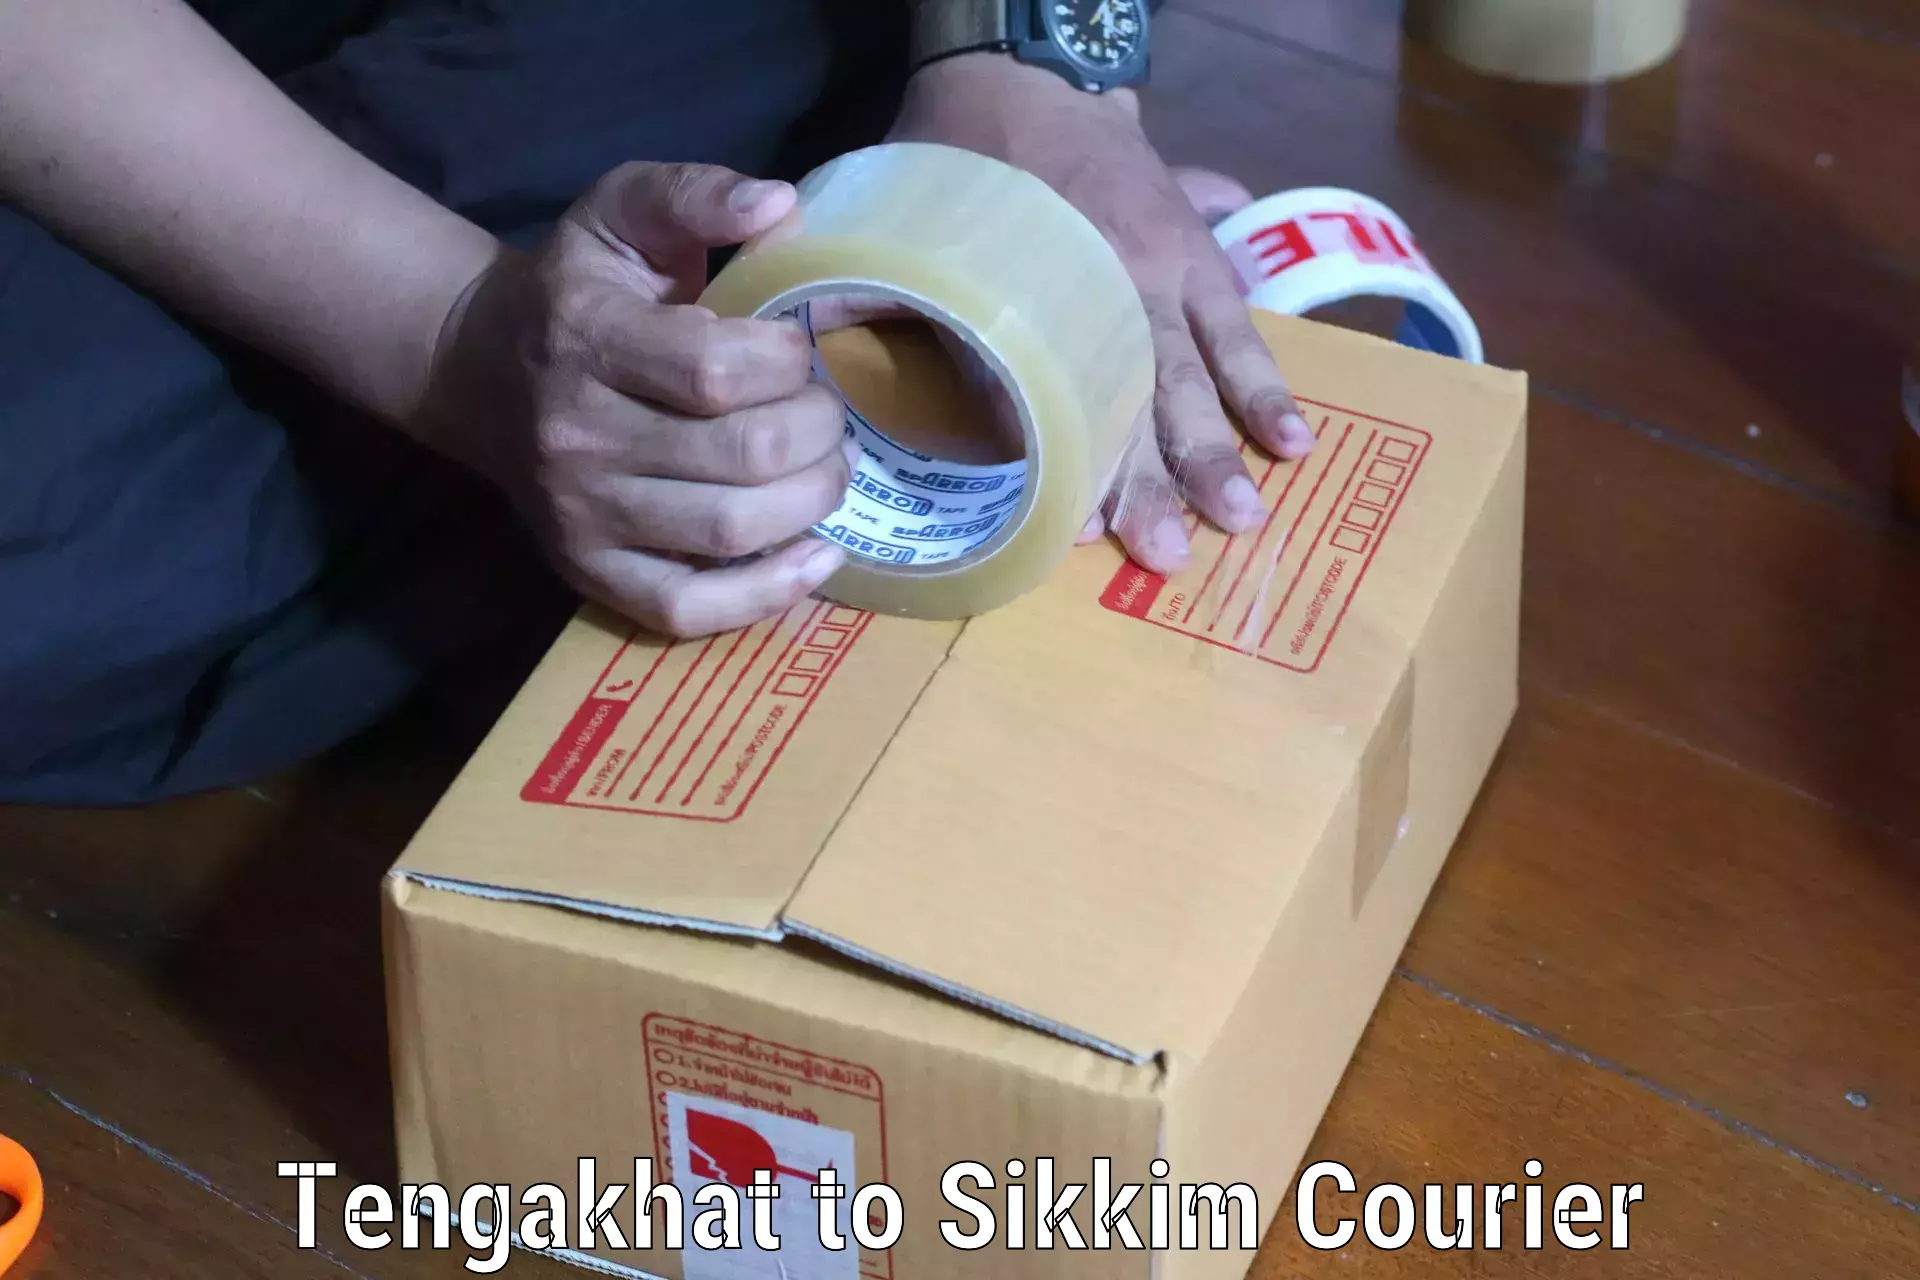 Sustainable shipping practices Tengakhat to North Sikkim